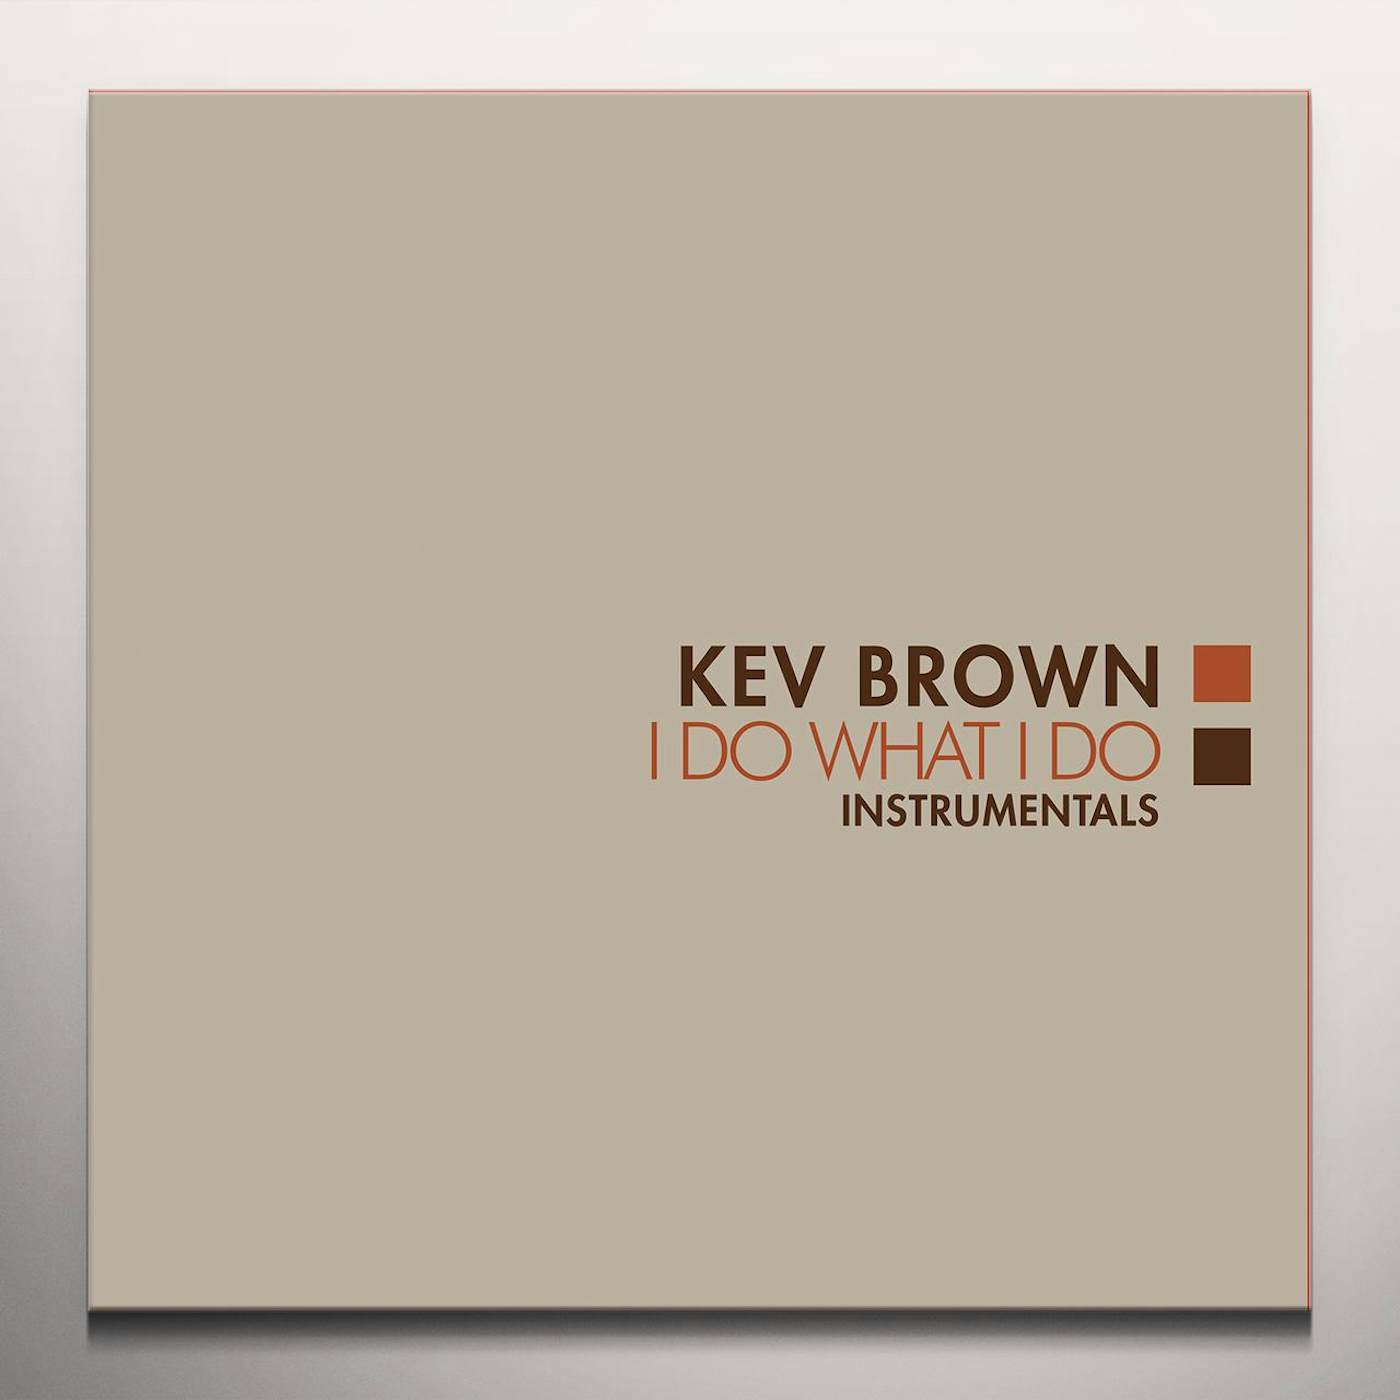 Kev Brown I DO WHAT I DO (INSTRUMENTALS) - Limited Edition Orange Colored Vinyl Record